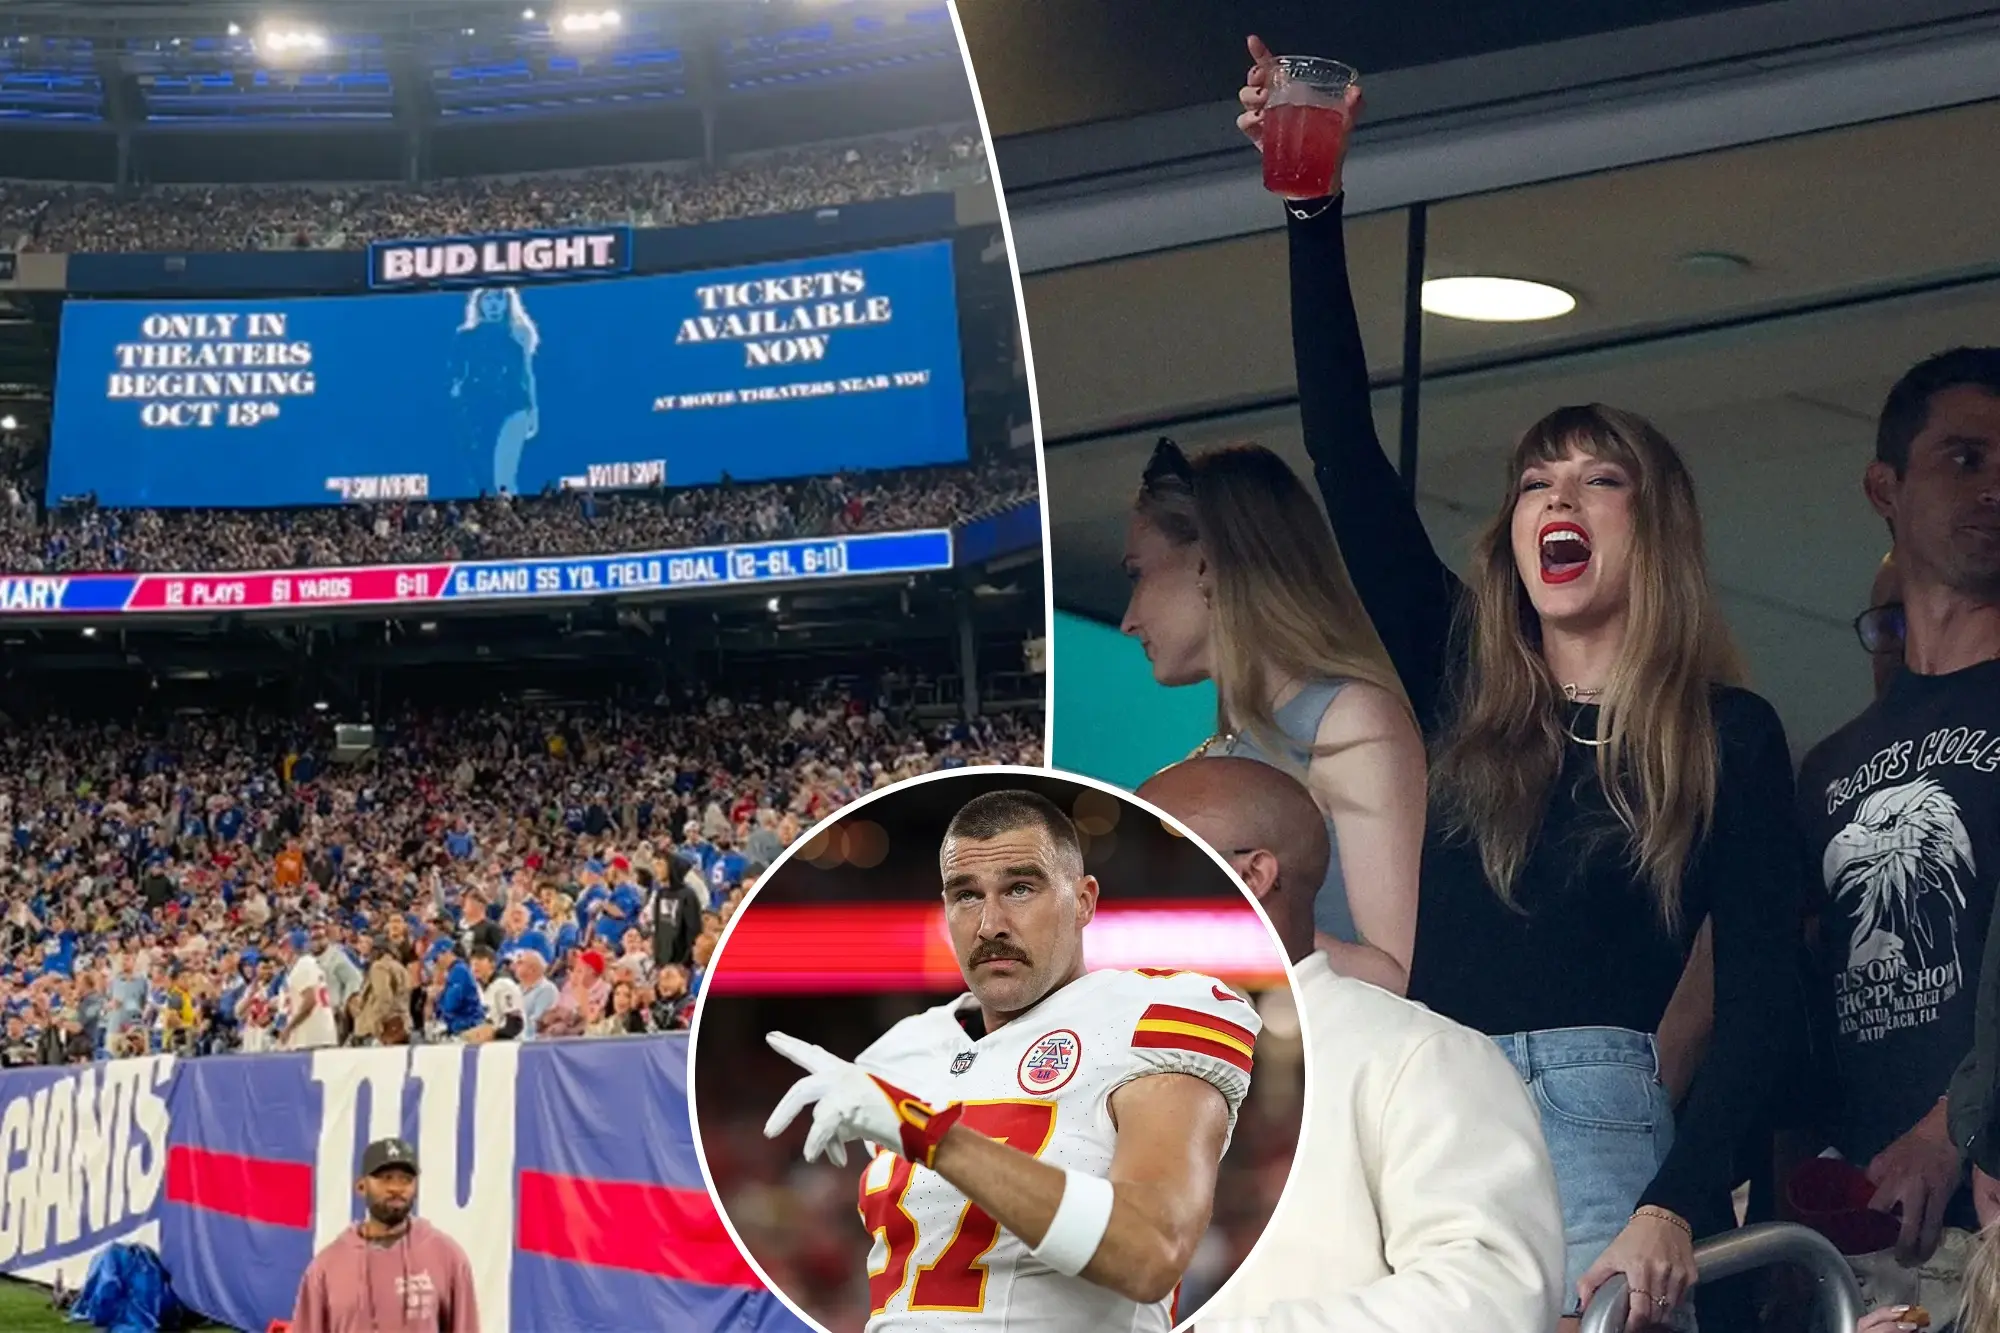 Taylor Swift Ad Booed By New York Giants Fans At MetLife Stadium During ‘Monday Night Football’